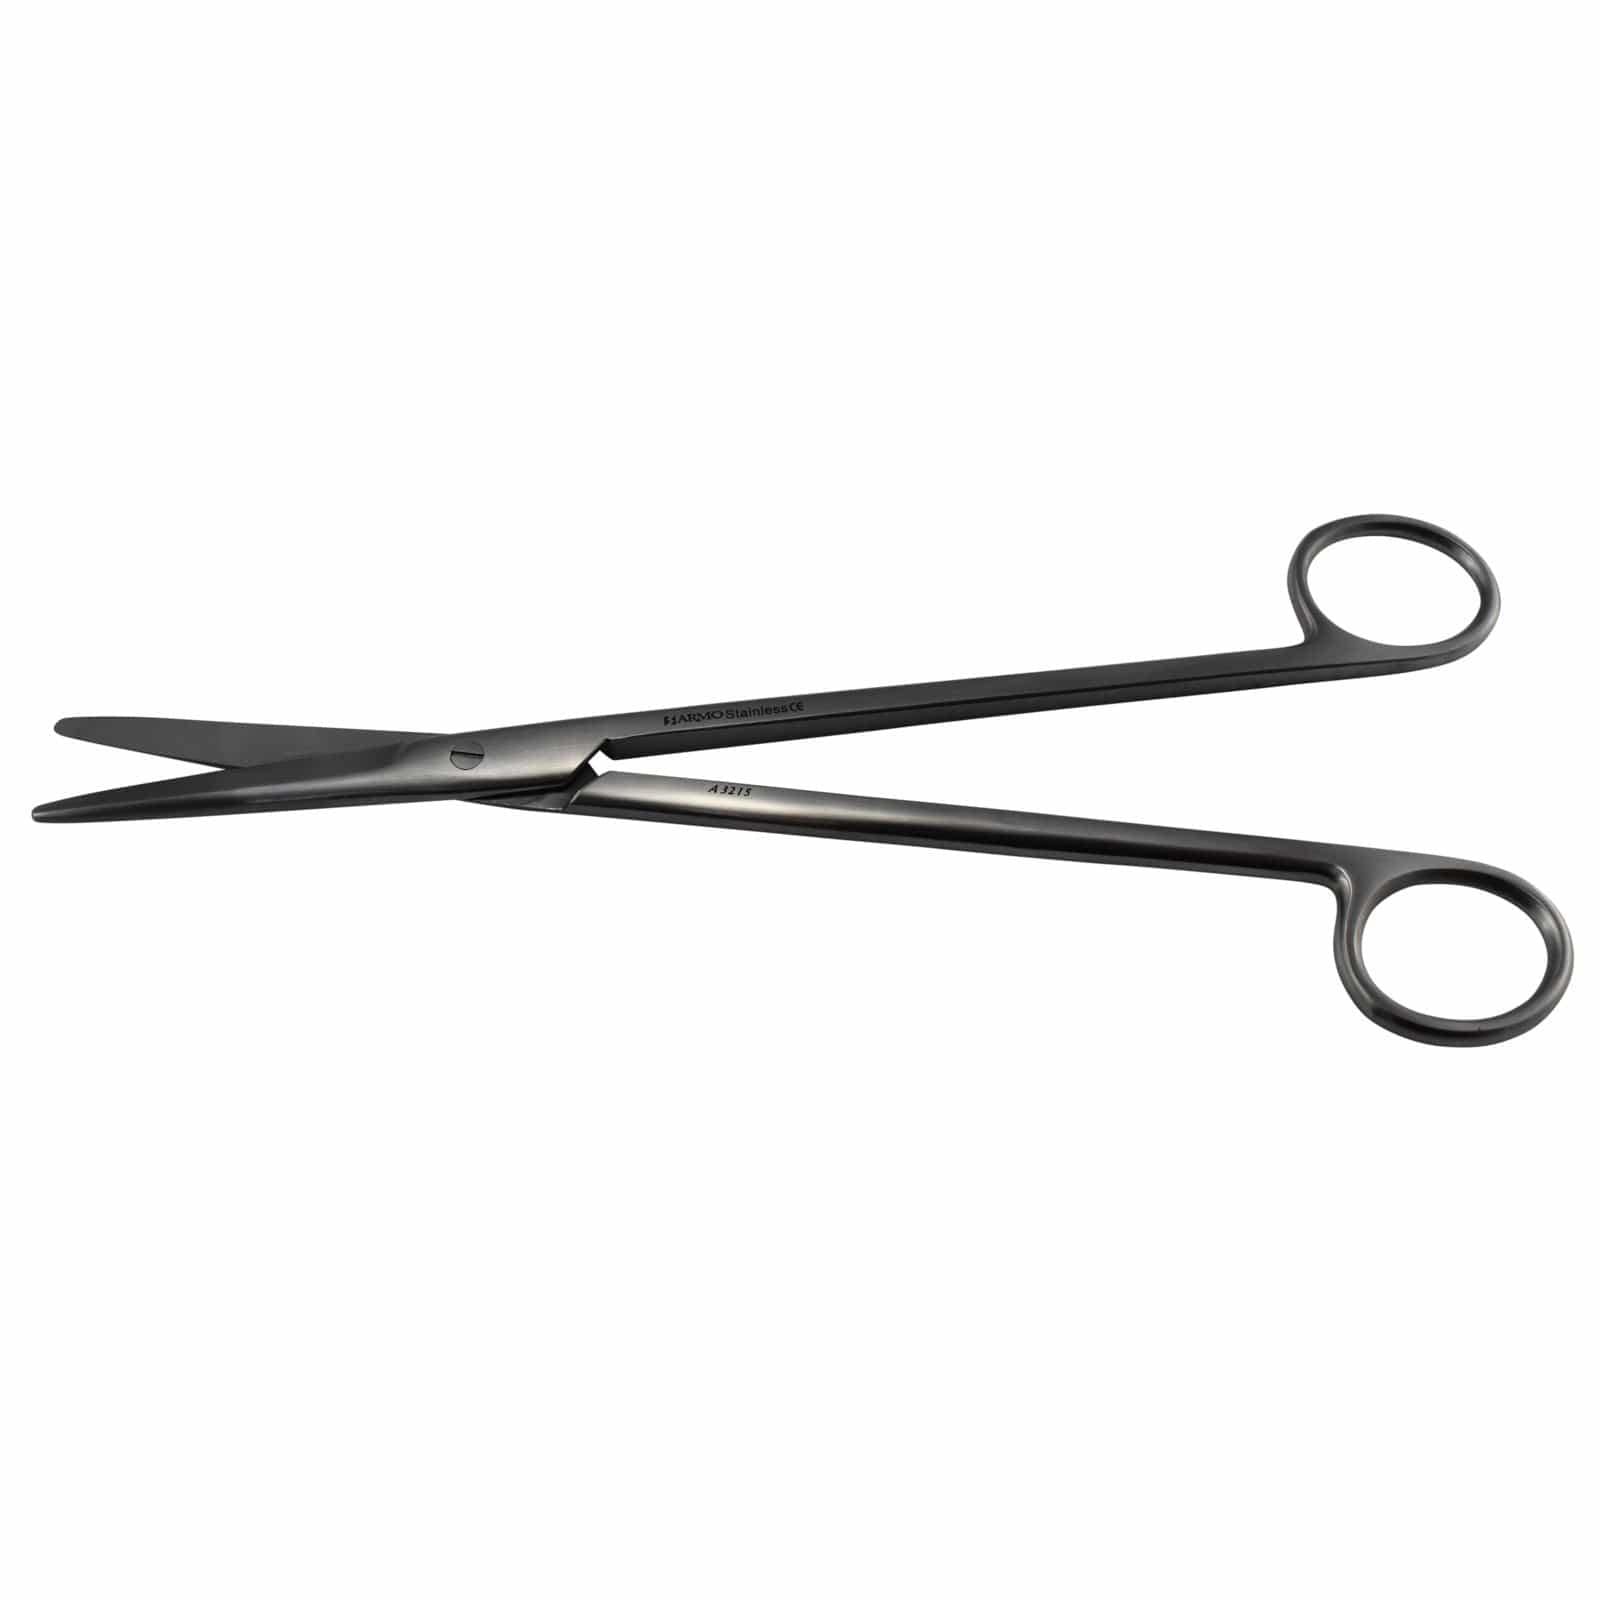 Armo Surgical Instruments 23cm / Straight / Standard Armo Mayo Scissors